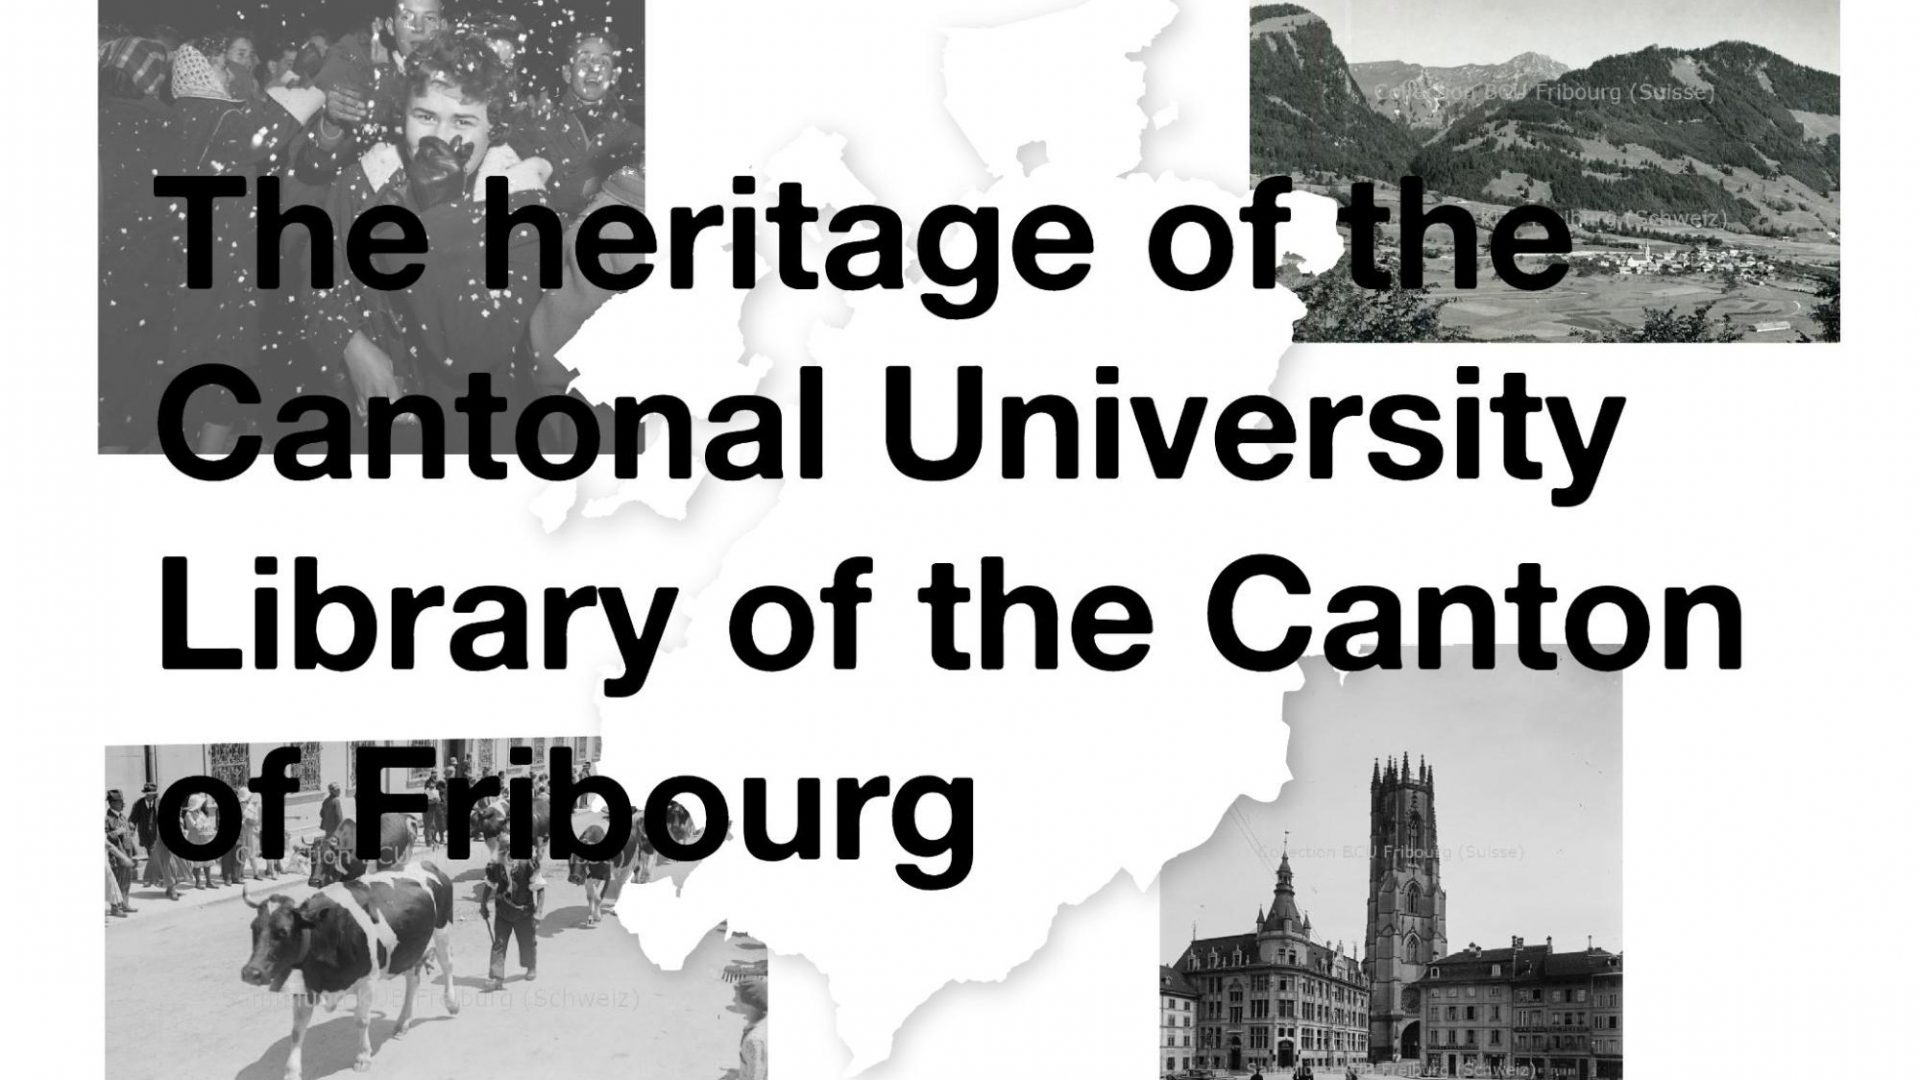 The heritage of the Contonal University Library of the Canton Fribourg